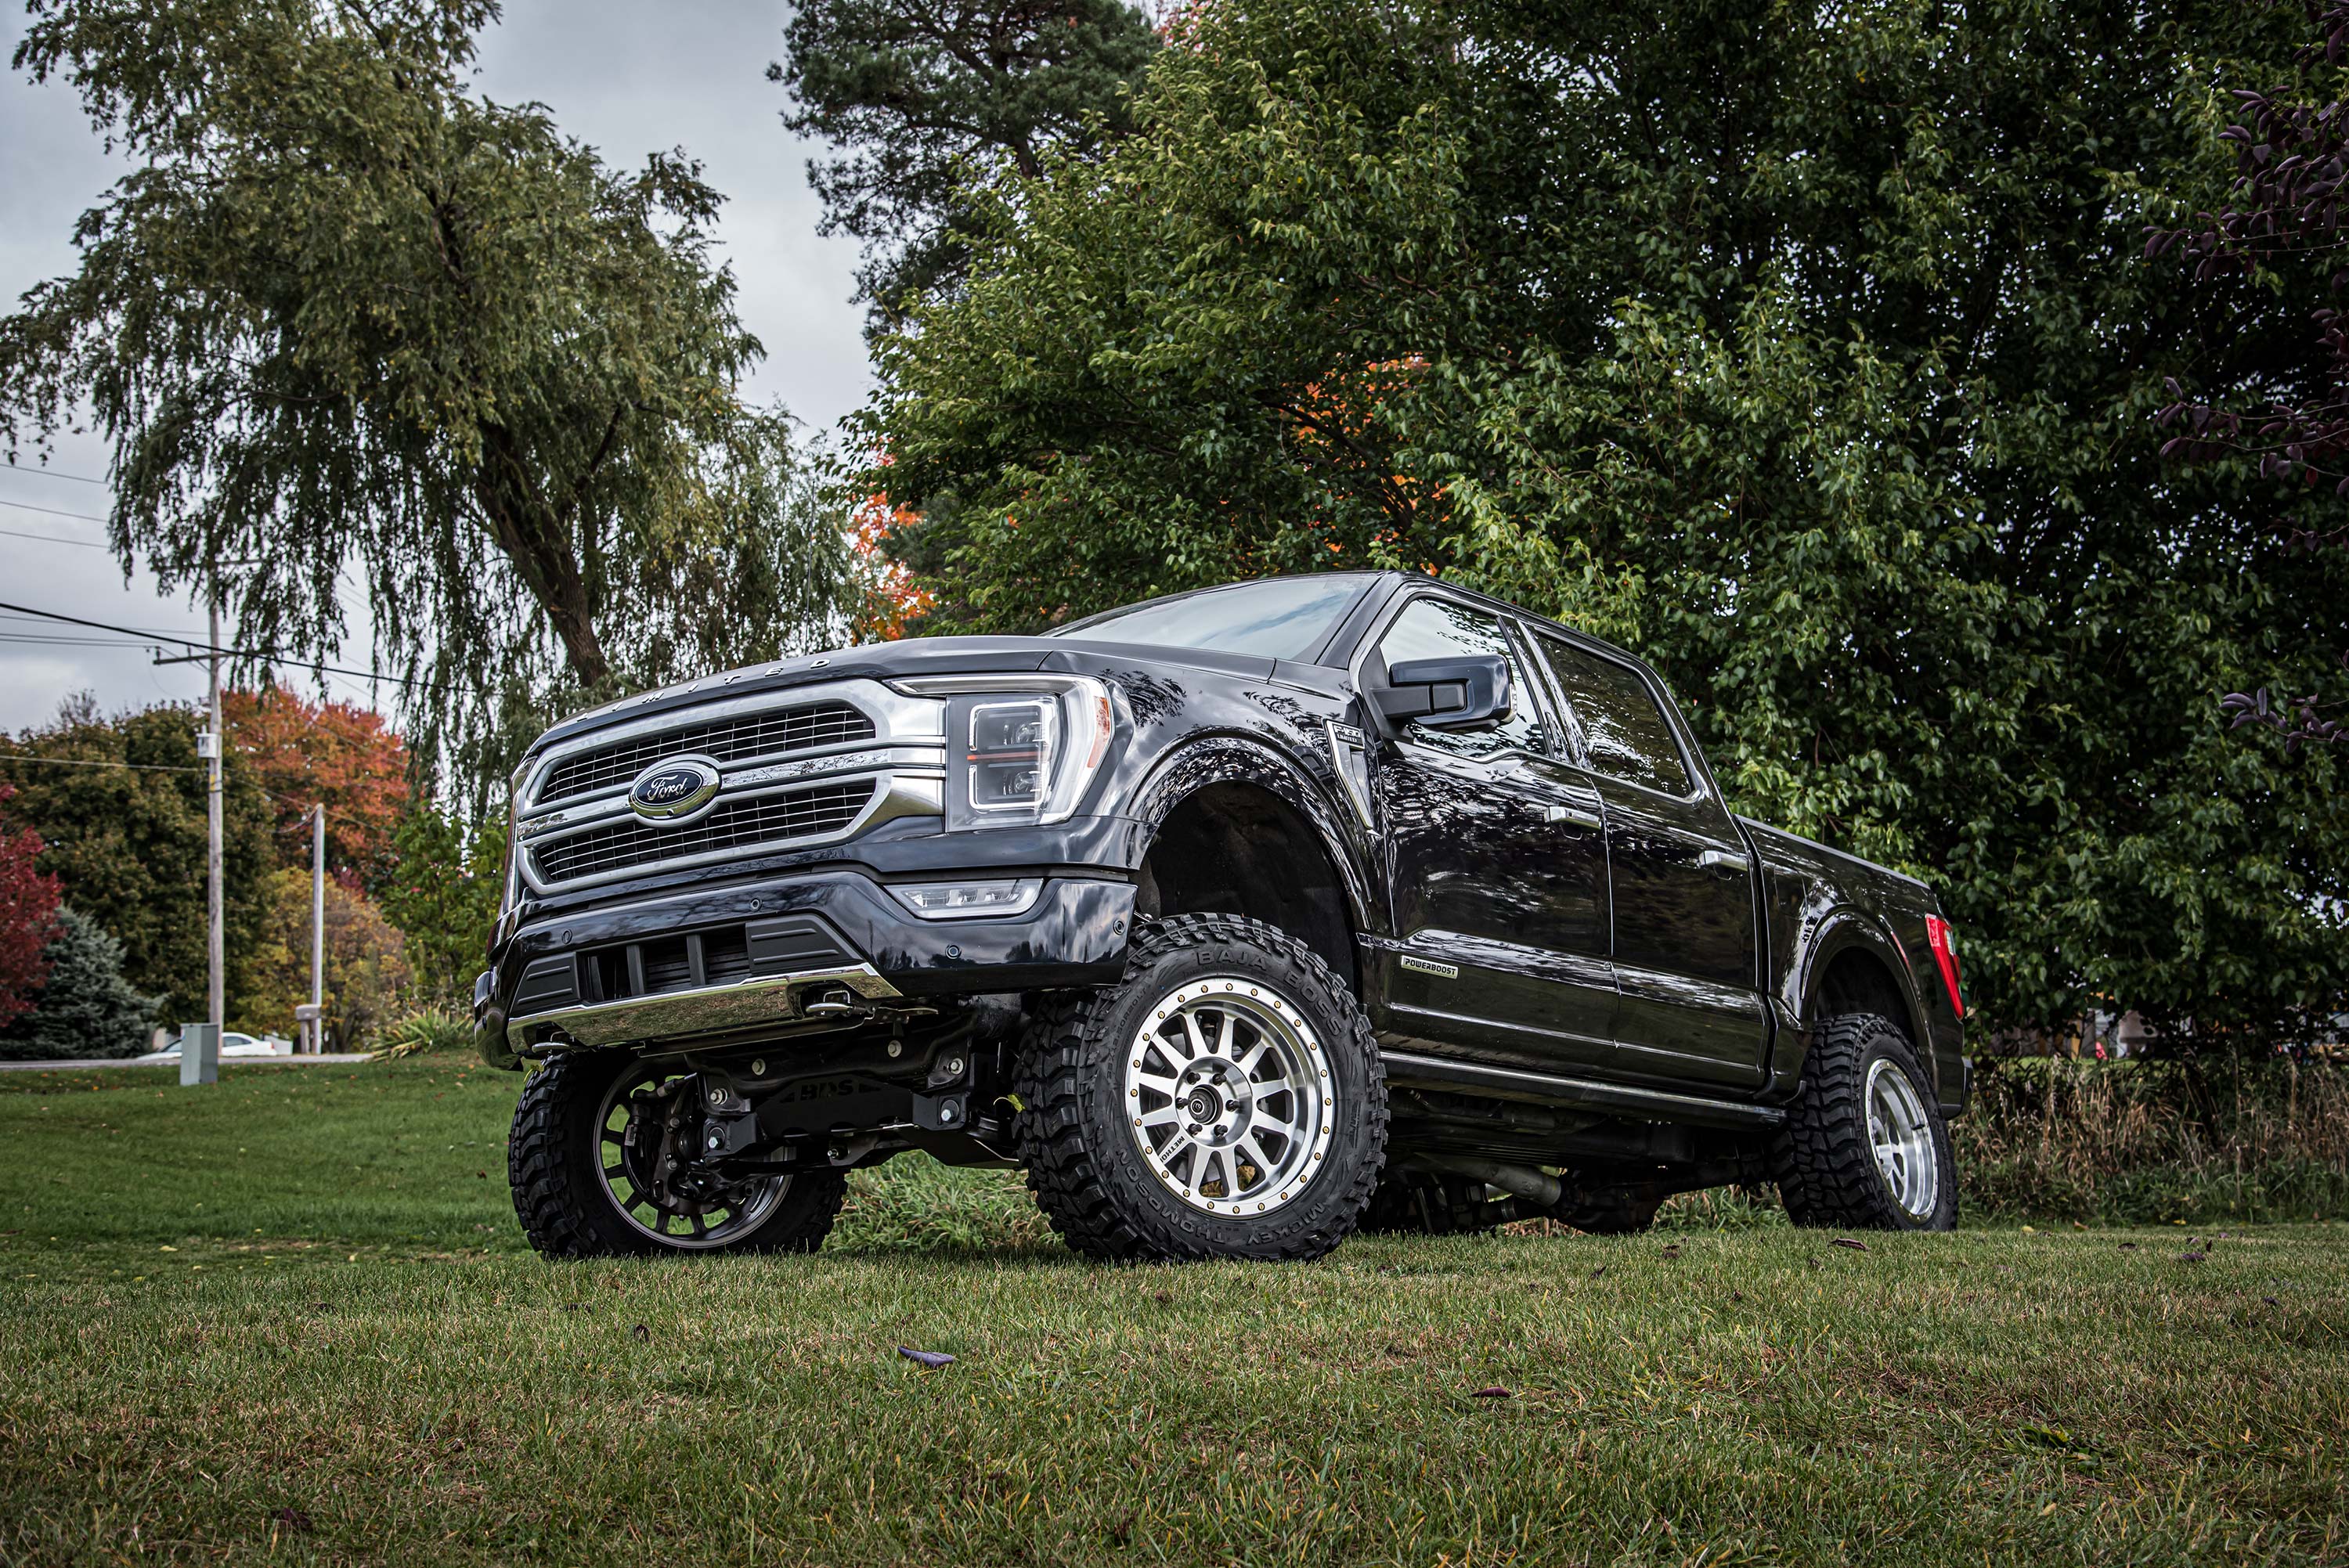 BDS 6" Lift Kit for 2015-2020 Ford F150 with Fox 2.5 Performance Elite Shocks - Outback Kitters